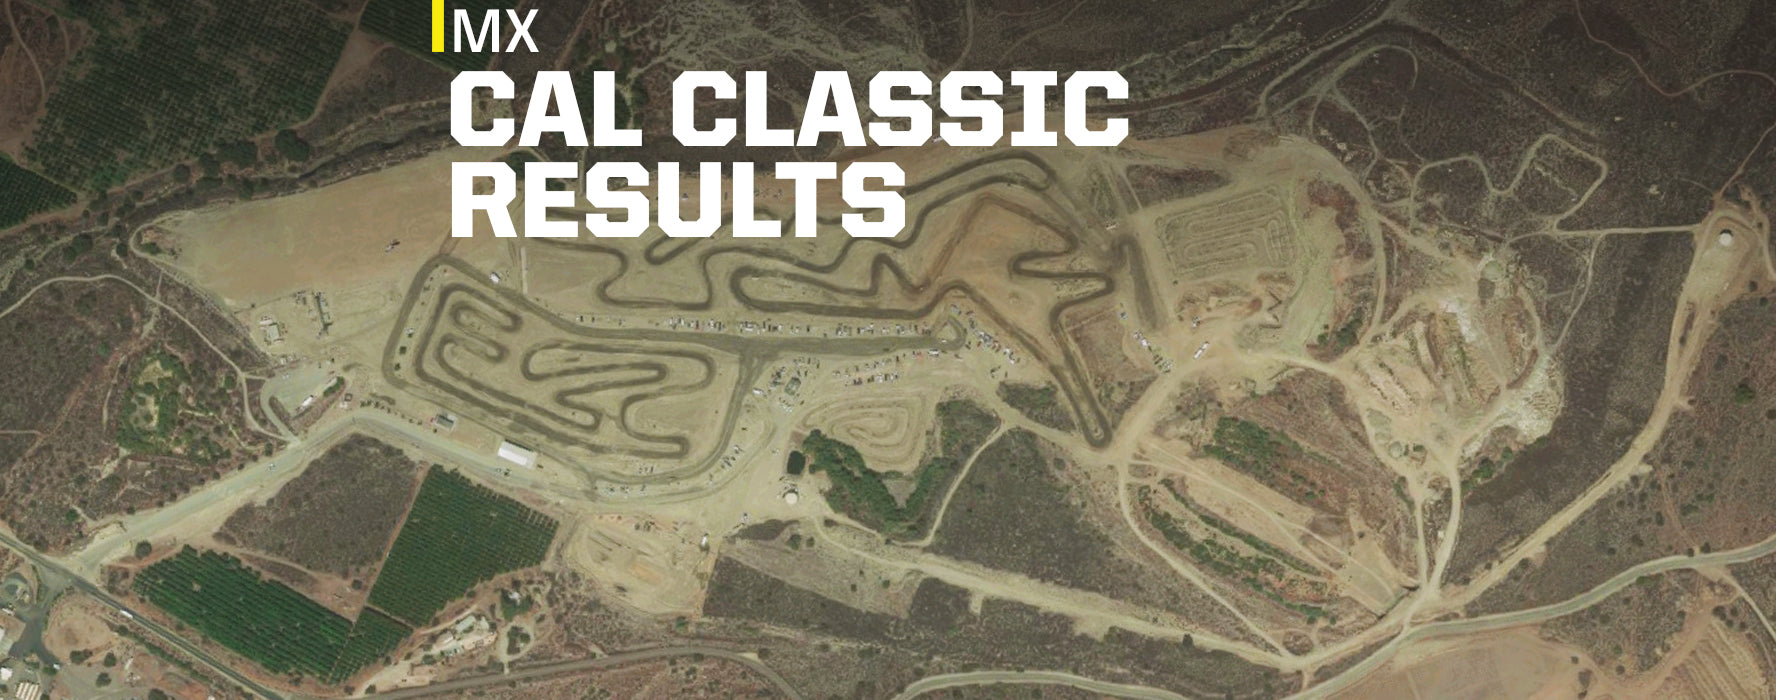 Cal Classic Results